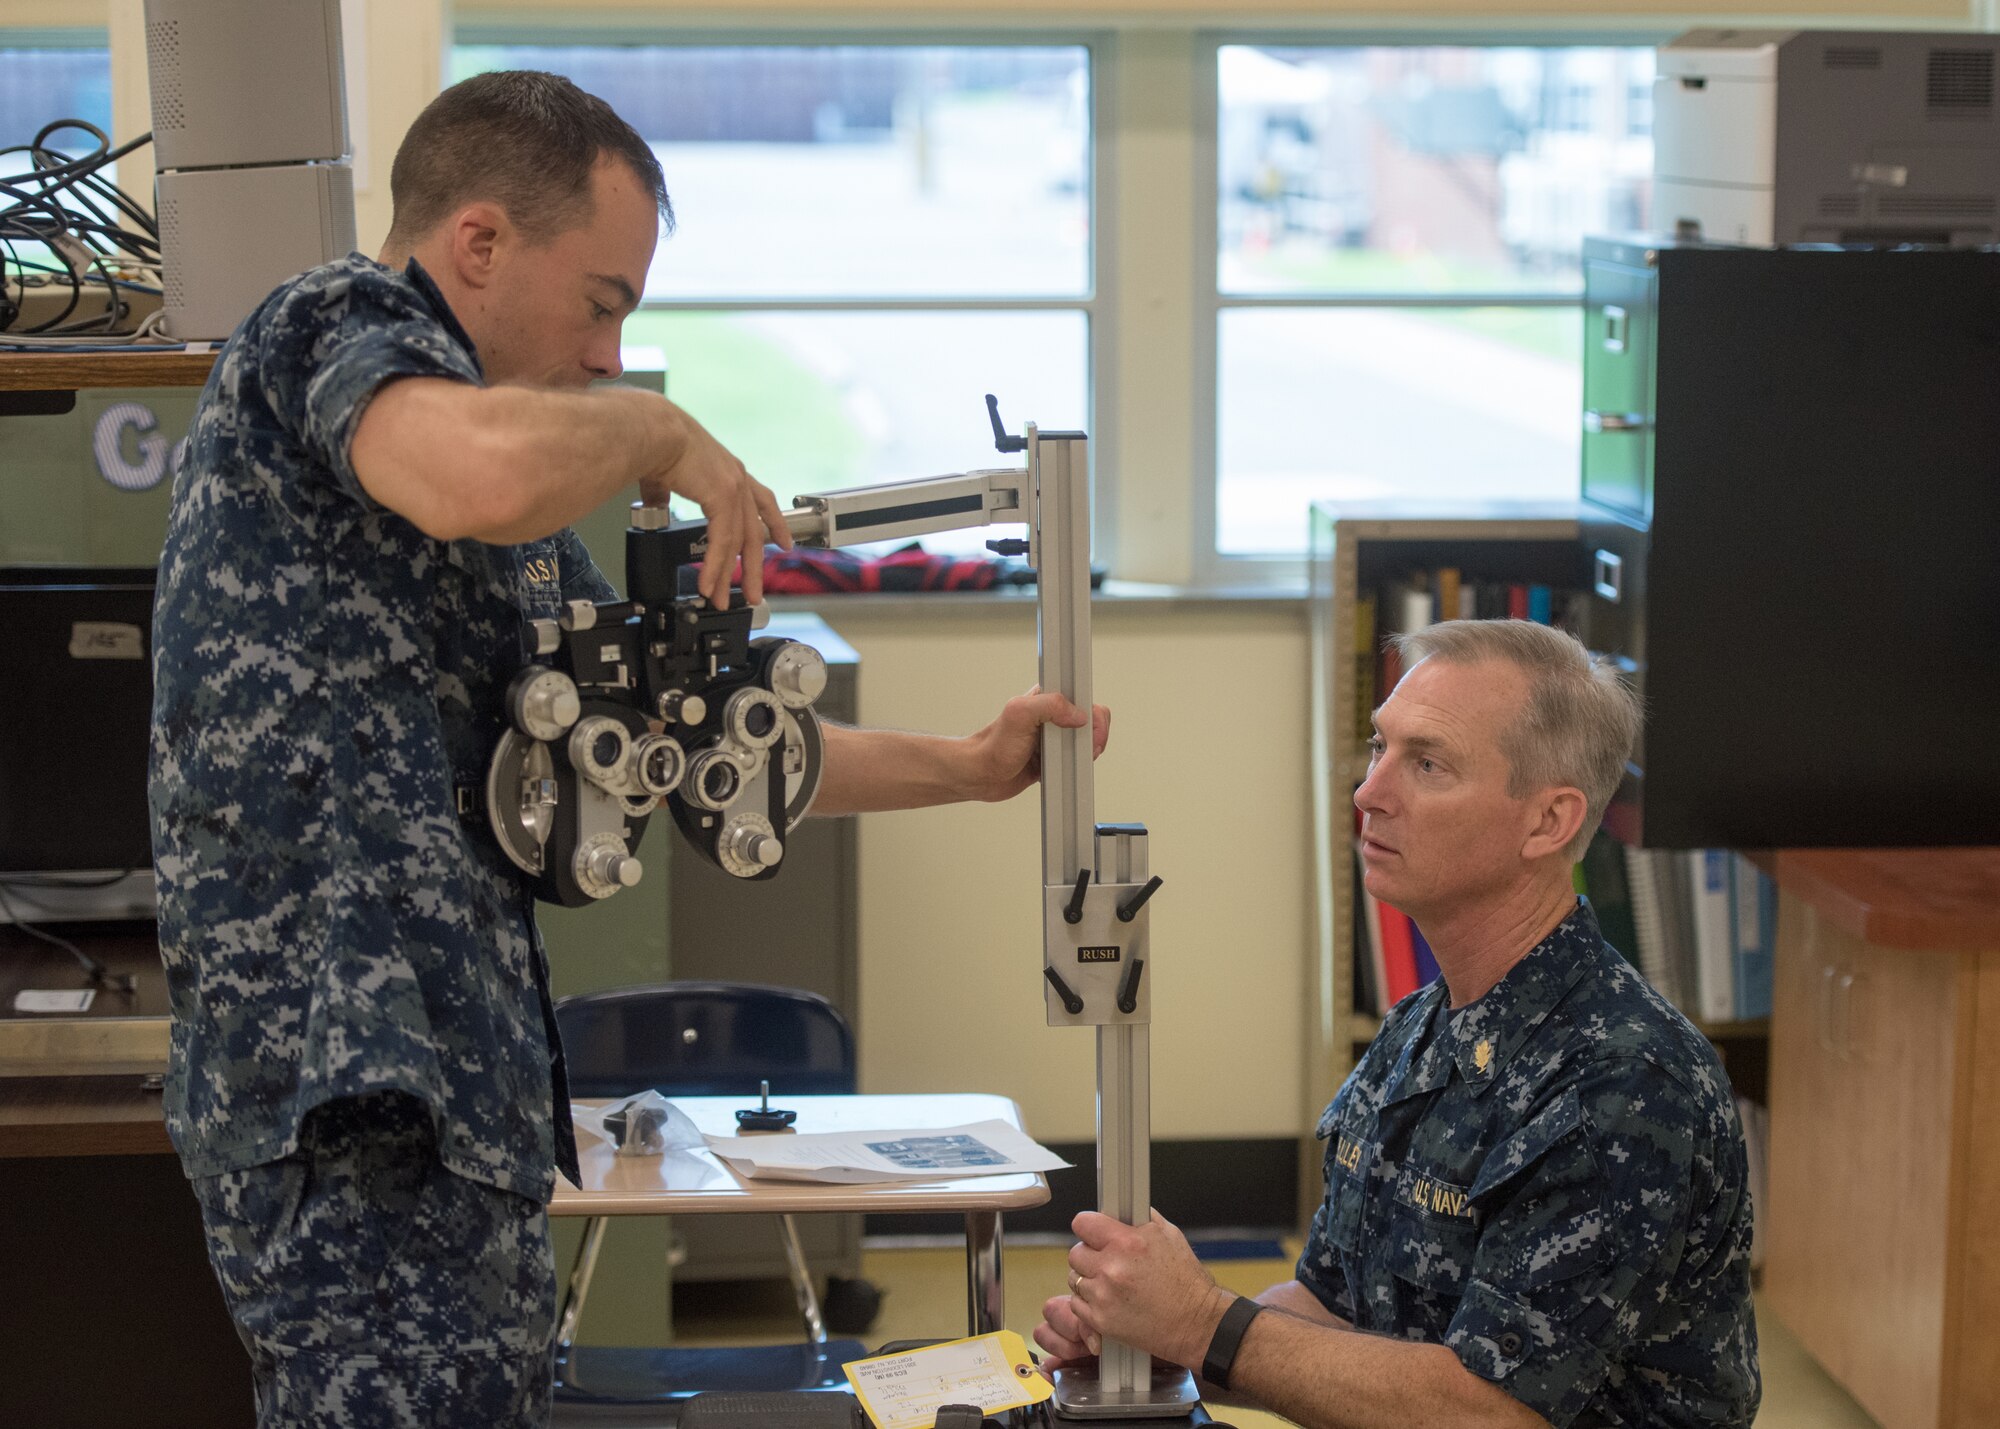 U.S. Navy Lt. Christopher Luft (left), an optometrist at Branch Health Clinic Navy Station Norfolk, and U.S. Navy Cmdr. Fred Kelley, an optometrist with Operational Health Support Unit Portsmouth Detachment M, setup optometry equipment at Paducah Tilghman High School in Paducah, Ky., July 17, 2016, in preparation for Bluegrass Medical Innovative Readiness Training. The program will offer medical and dental care at no cost to residents in three Western Kentucky locations from July 18 to 27.(U.S. Air National Guard photo by Master Sgt. Phil Speck)